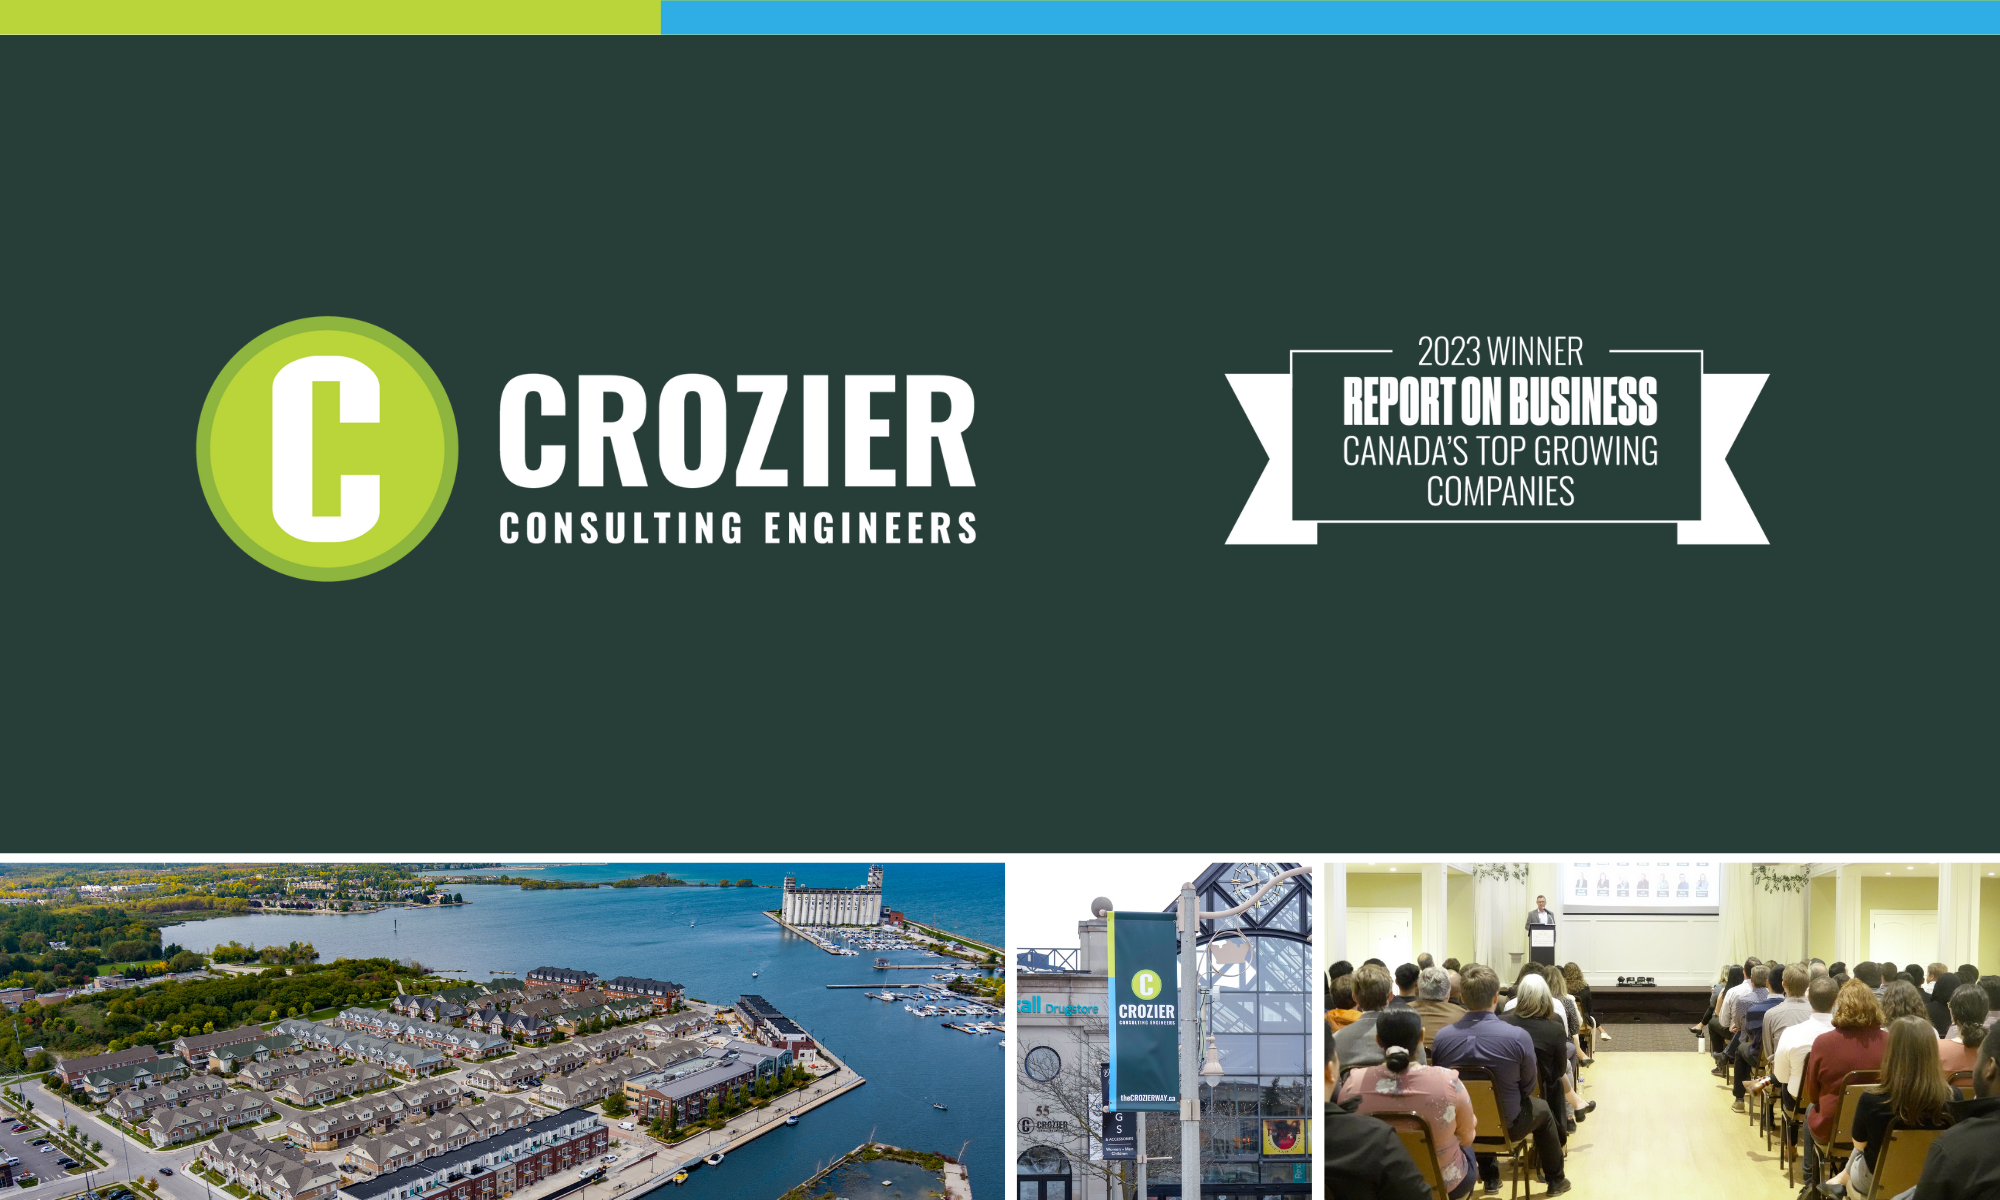 Crozier ranks as one of Canada’s Top Growing Companies in The Globe and Mail's fifth-annual report